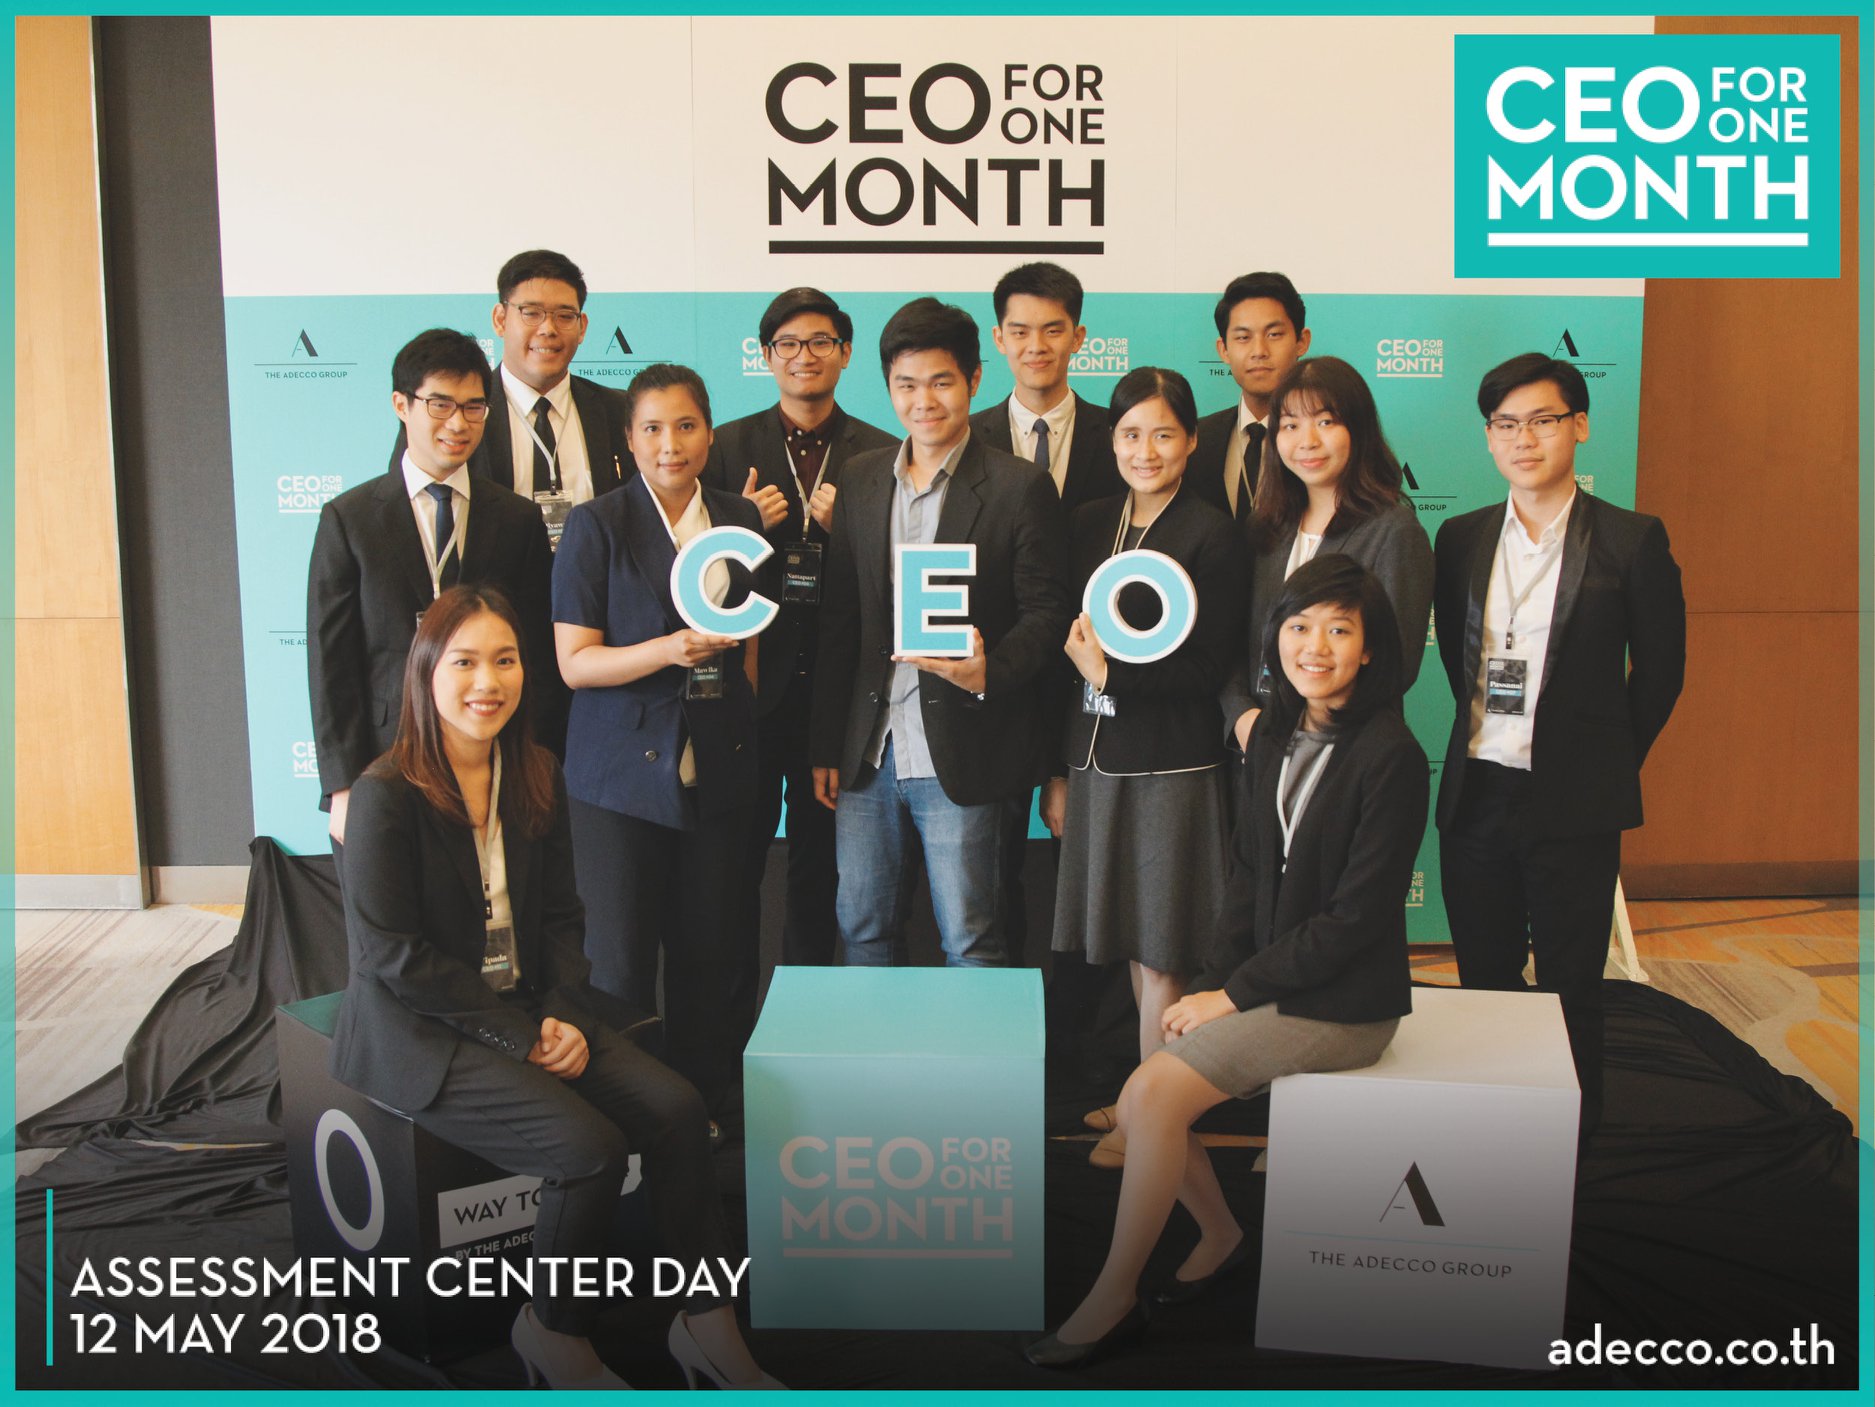 CEO for ONE Month 2018 ประเทศไทย